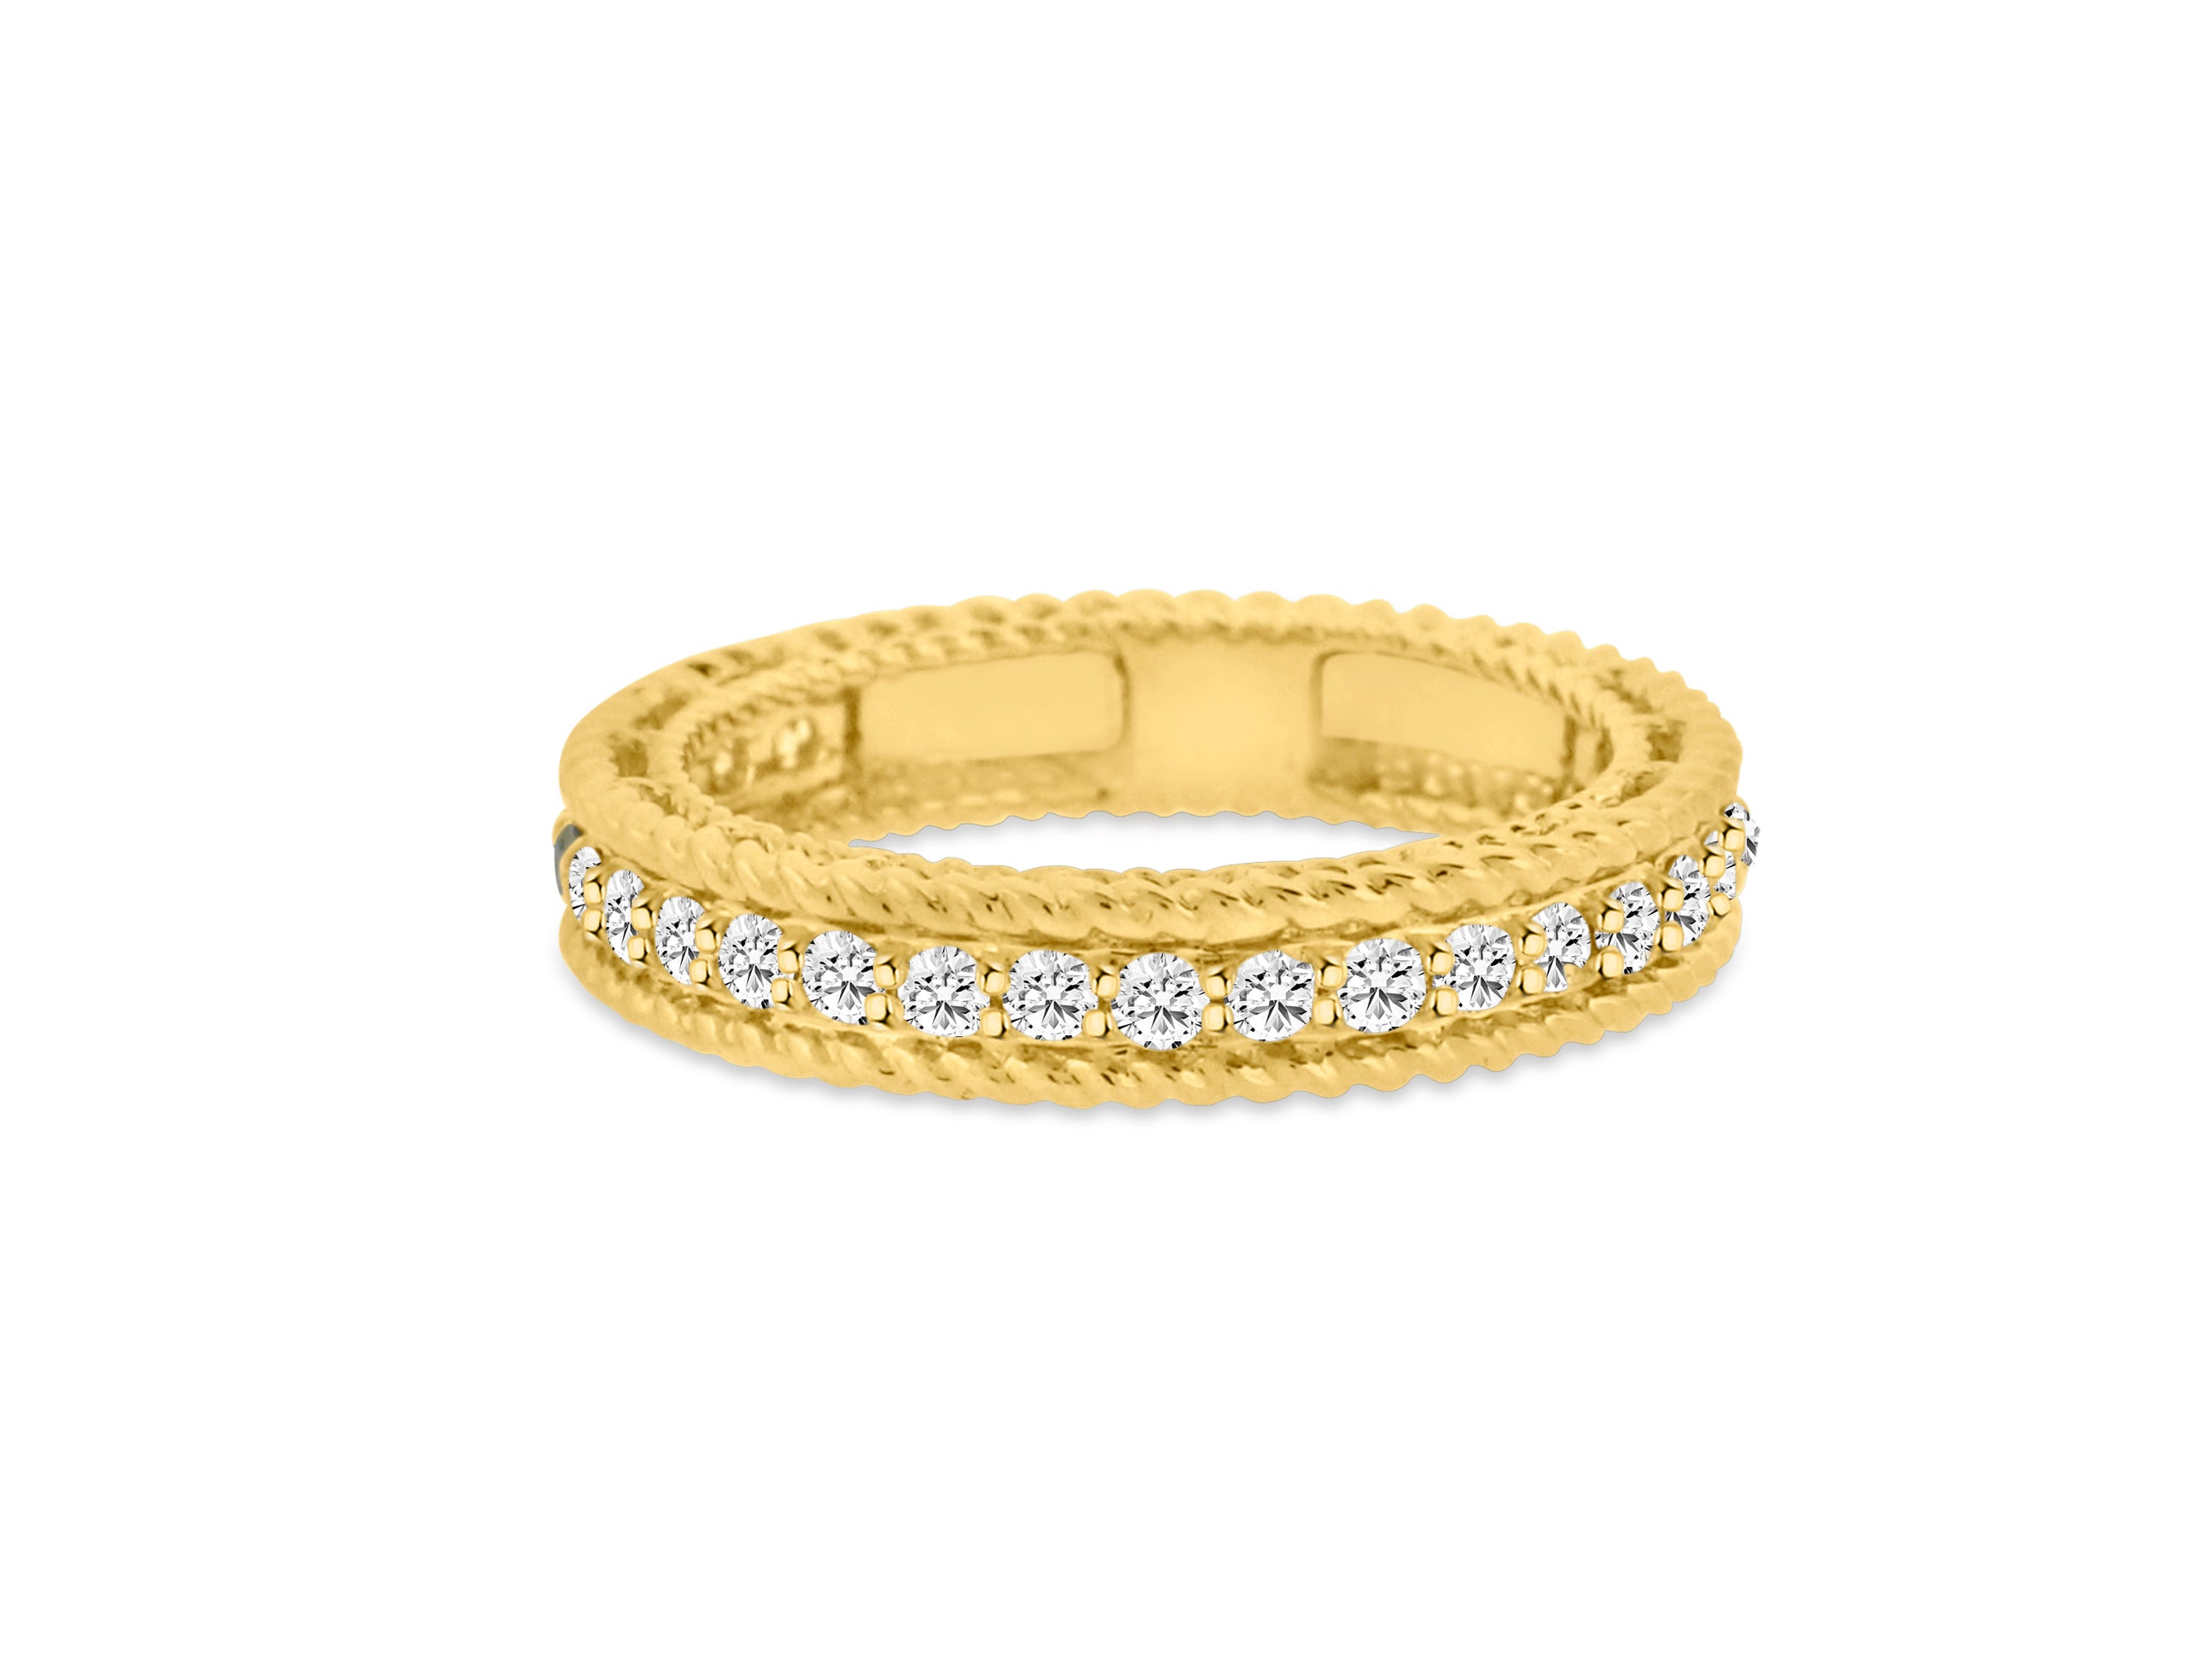 MULLOYS PRIVE'14K YELLOW GOLD  .55CT SI1-2 CLARITY AND G-H COLOR PRIVE' BAND